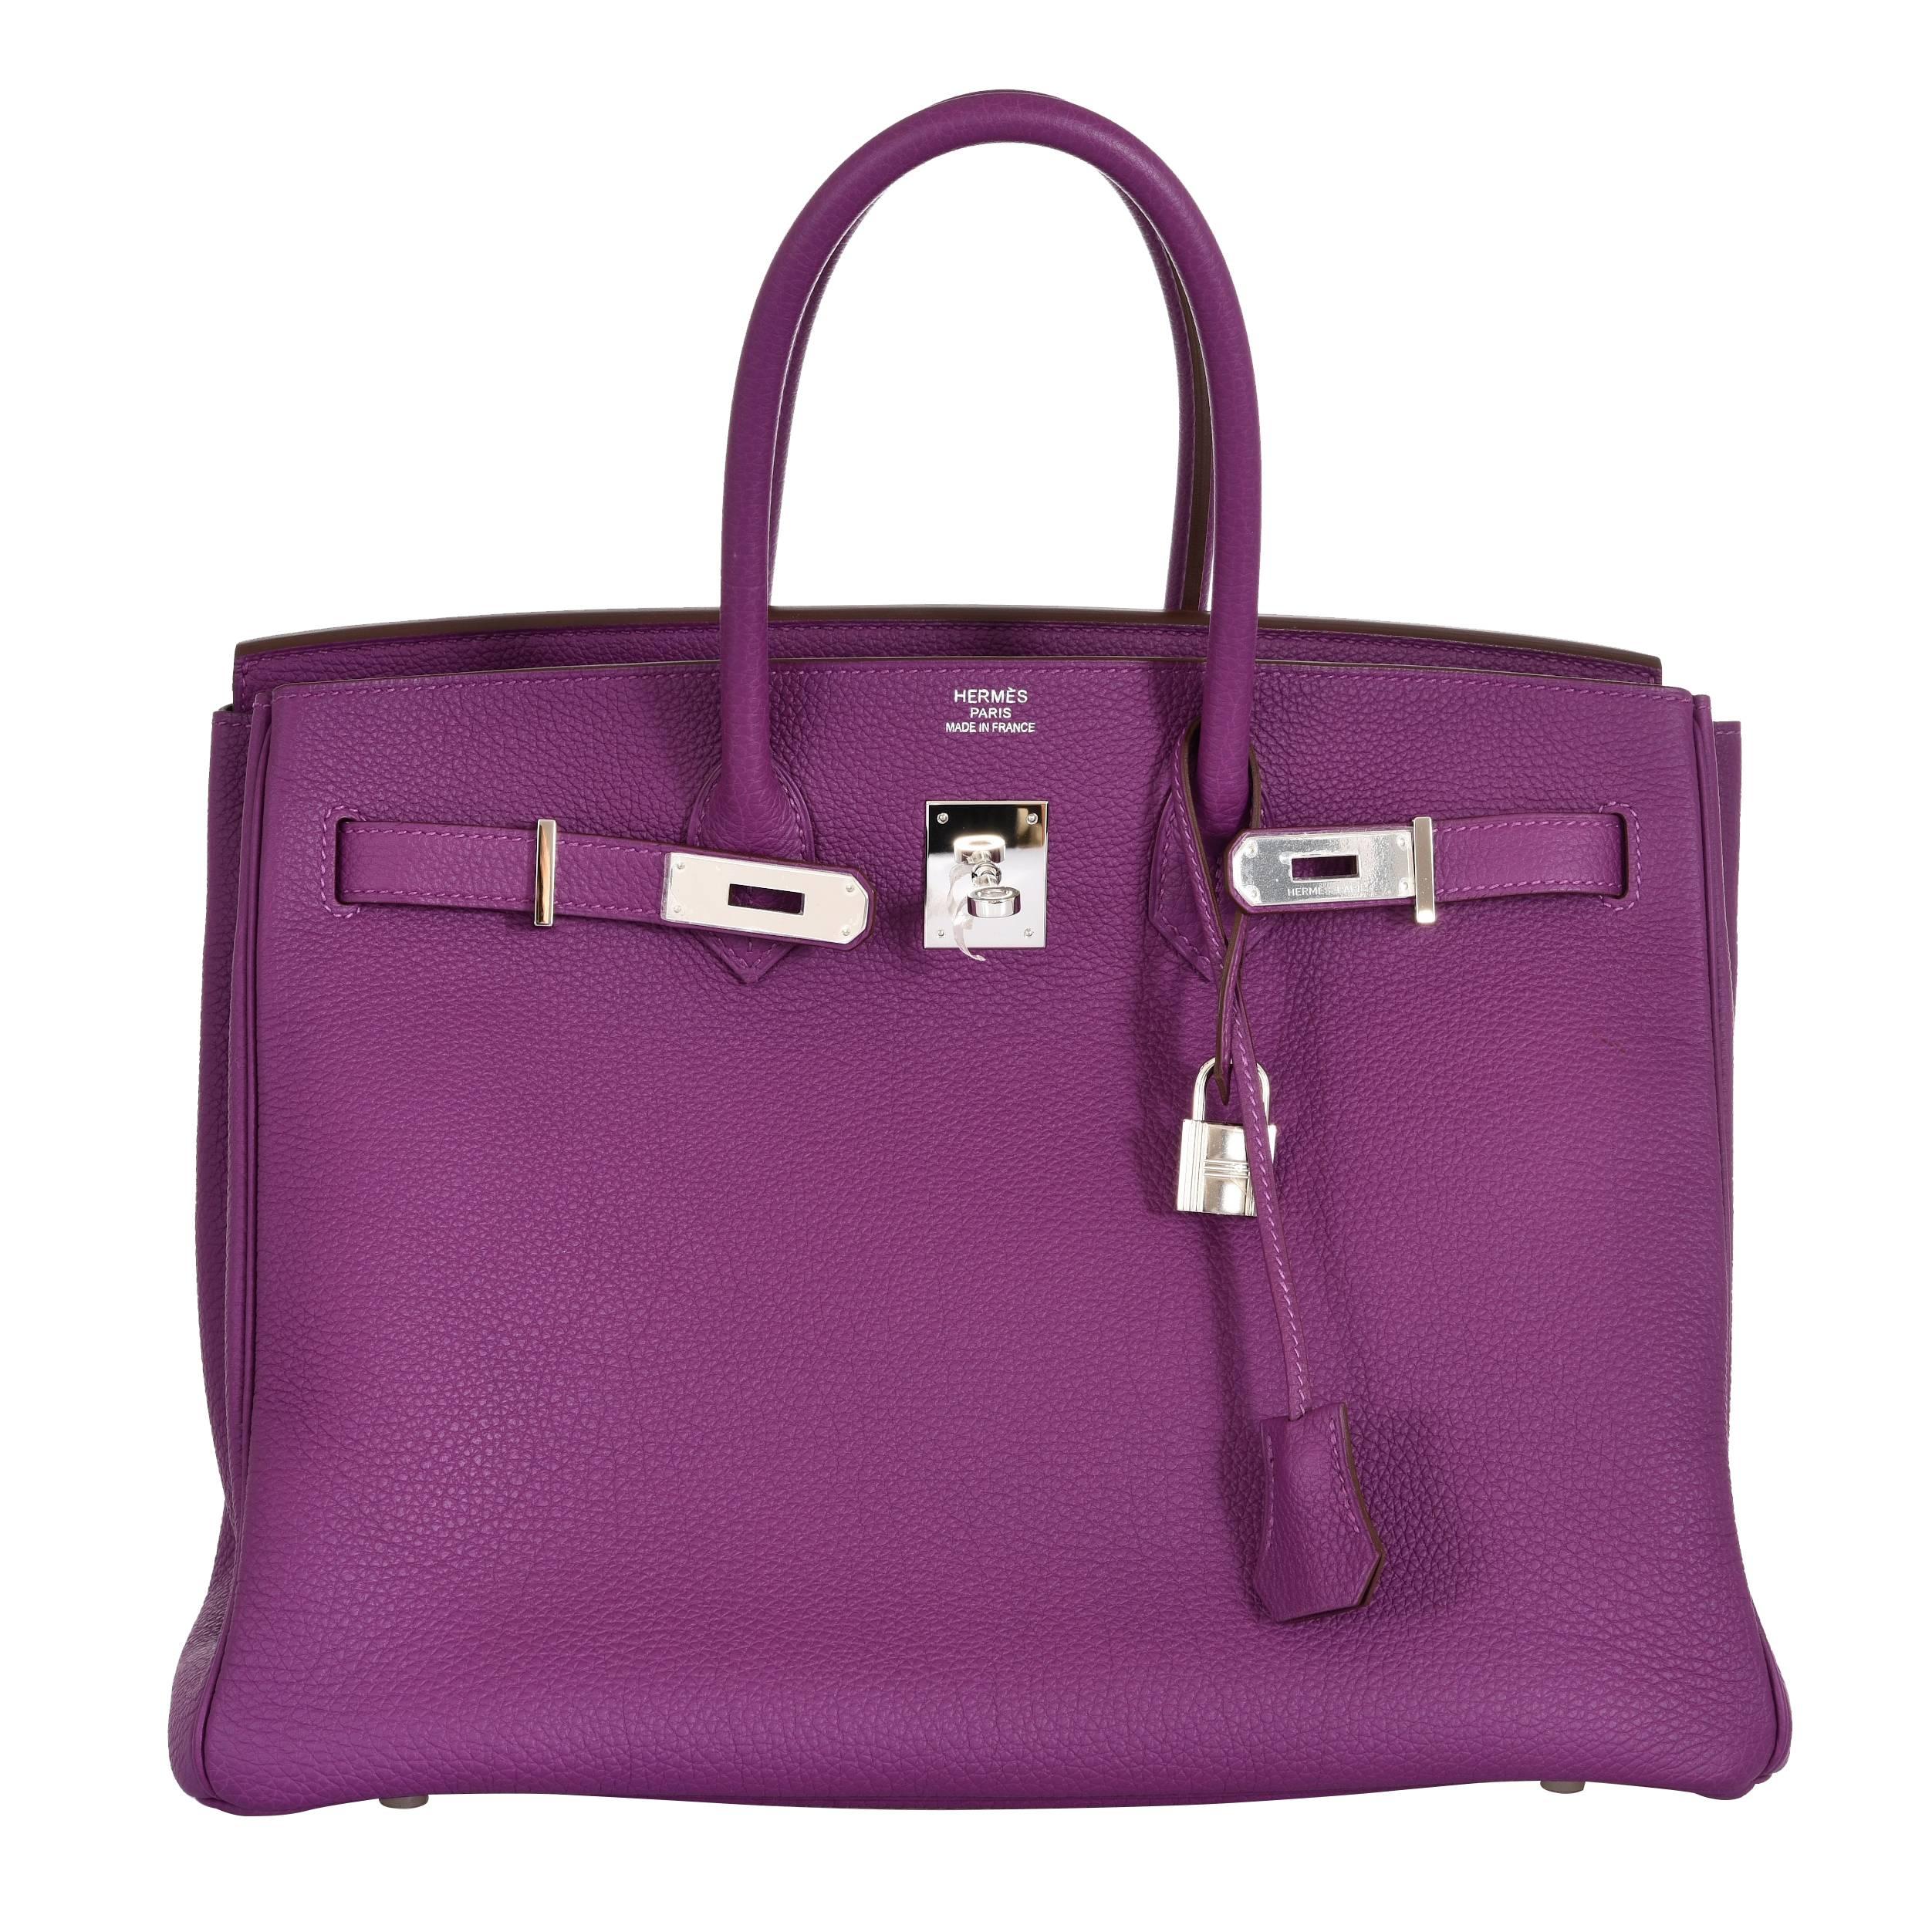 Hermes Birkin Bag 35cm Anemone with Pall Hardware JaneFinds For Sale